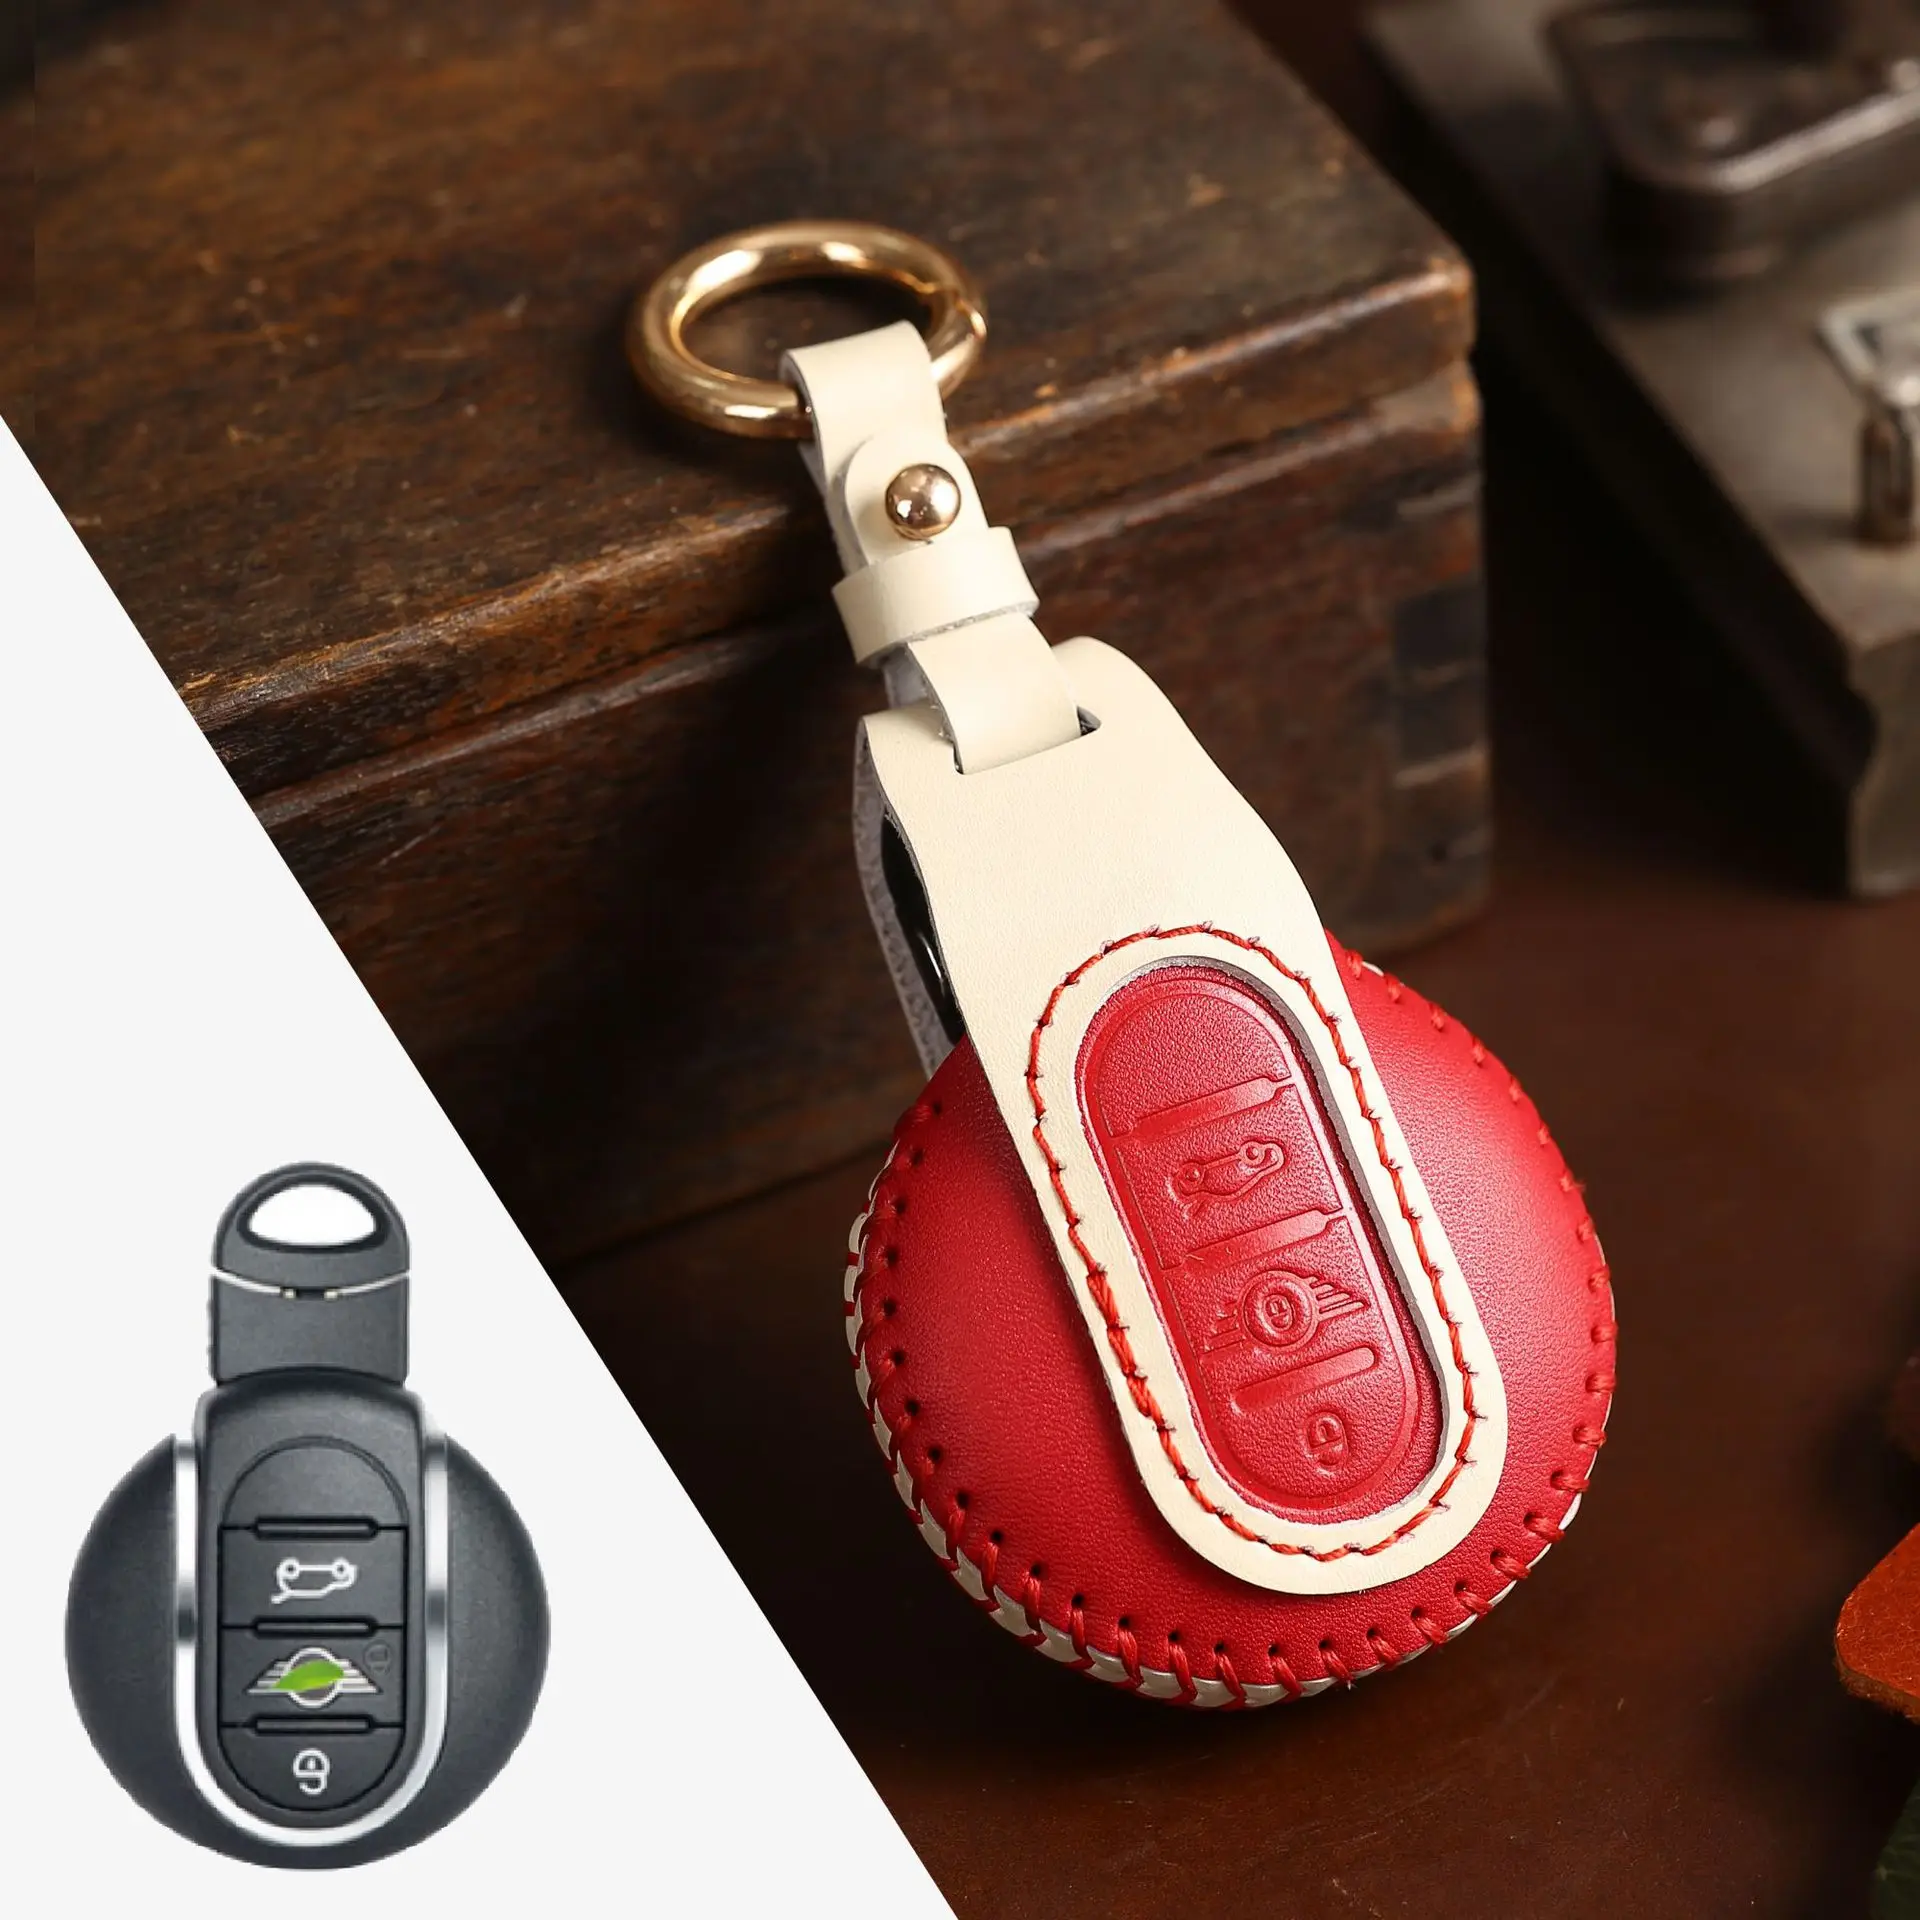 Vitodeco Genuine Leather Smart Key Fob Case Cover Protector with Leather Key Chain for Mini Cooper 2015-2020 3 or 4 Buttons, Black Mini Cooper Clubman 2015-2020 